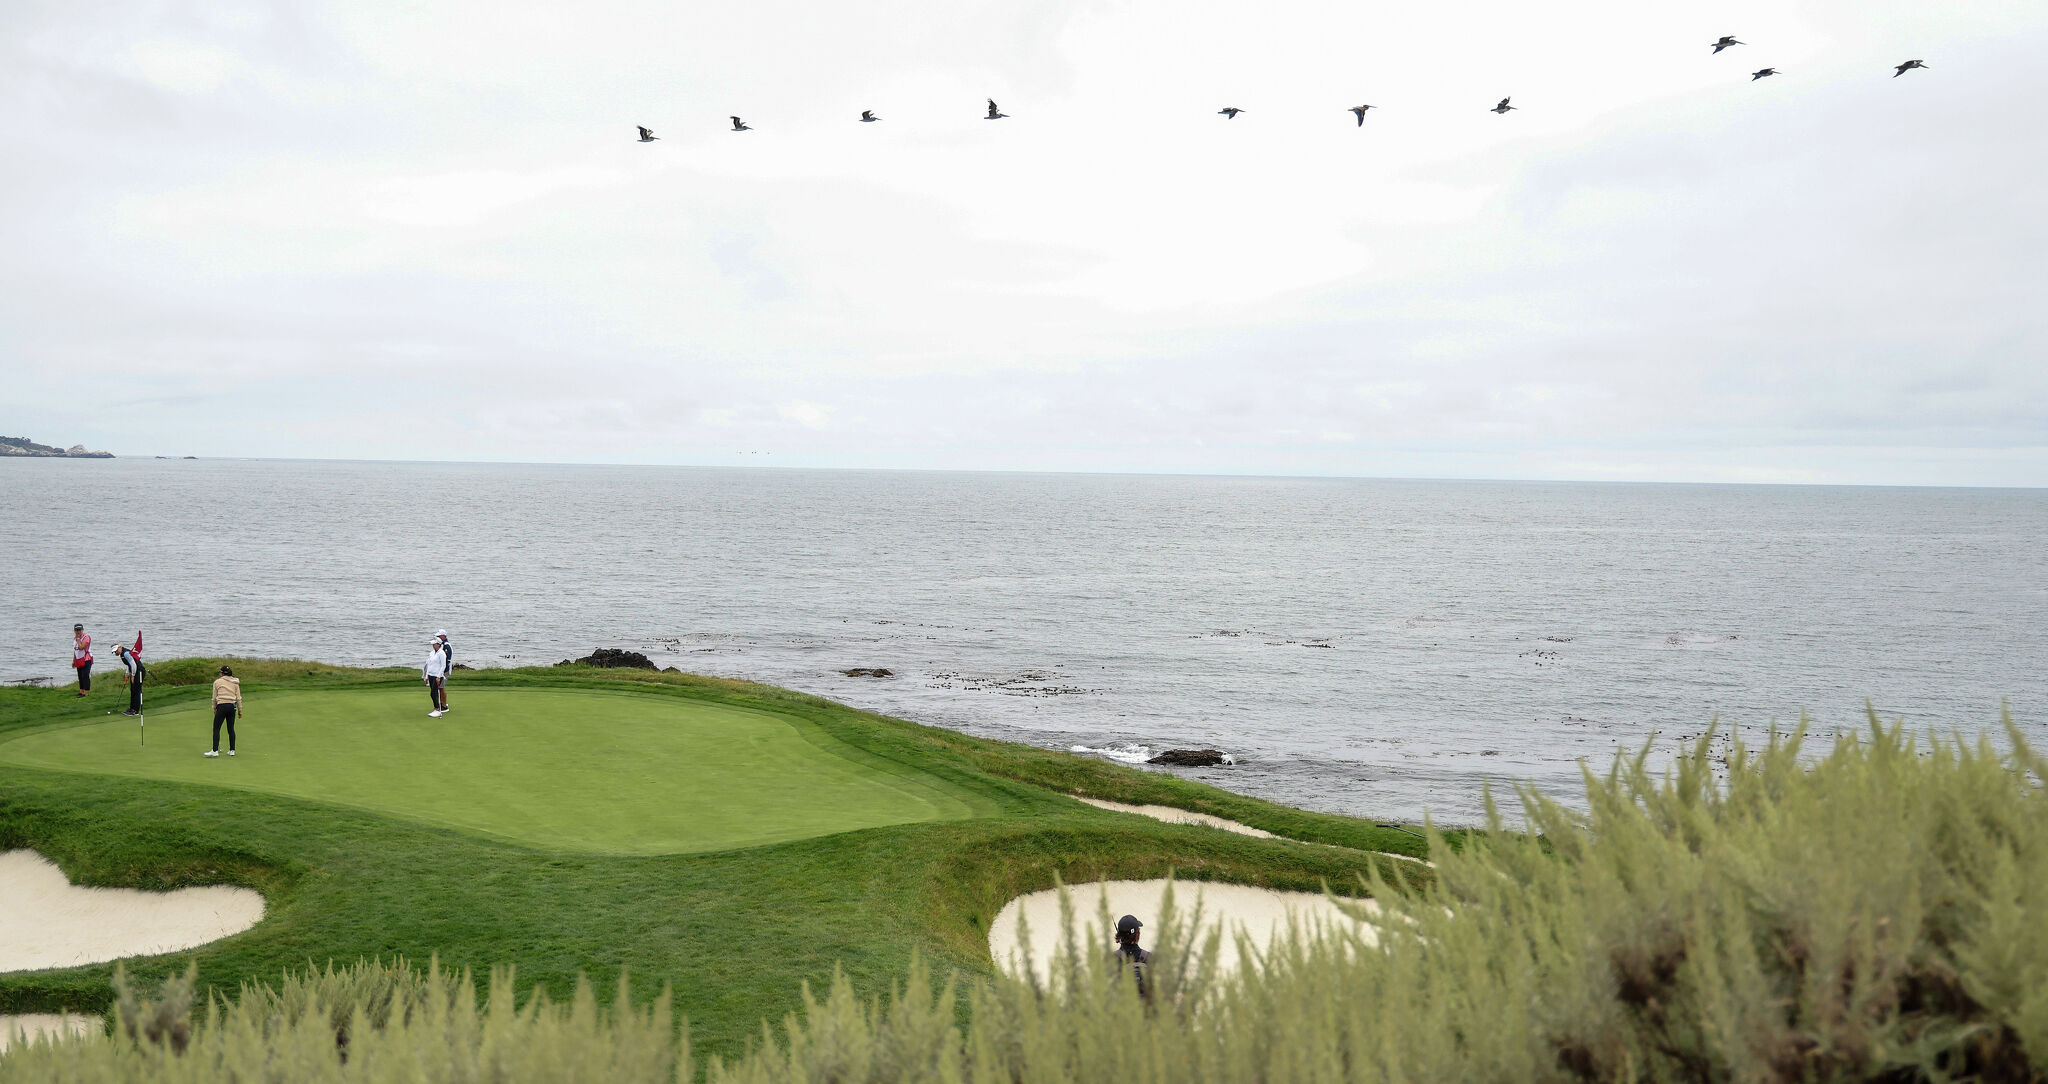 Pebble Beach produces high scores in first round of U.S. Women's Open